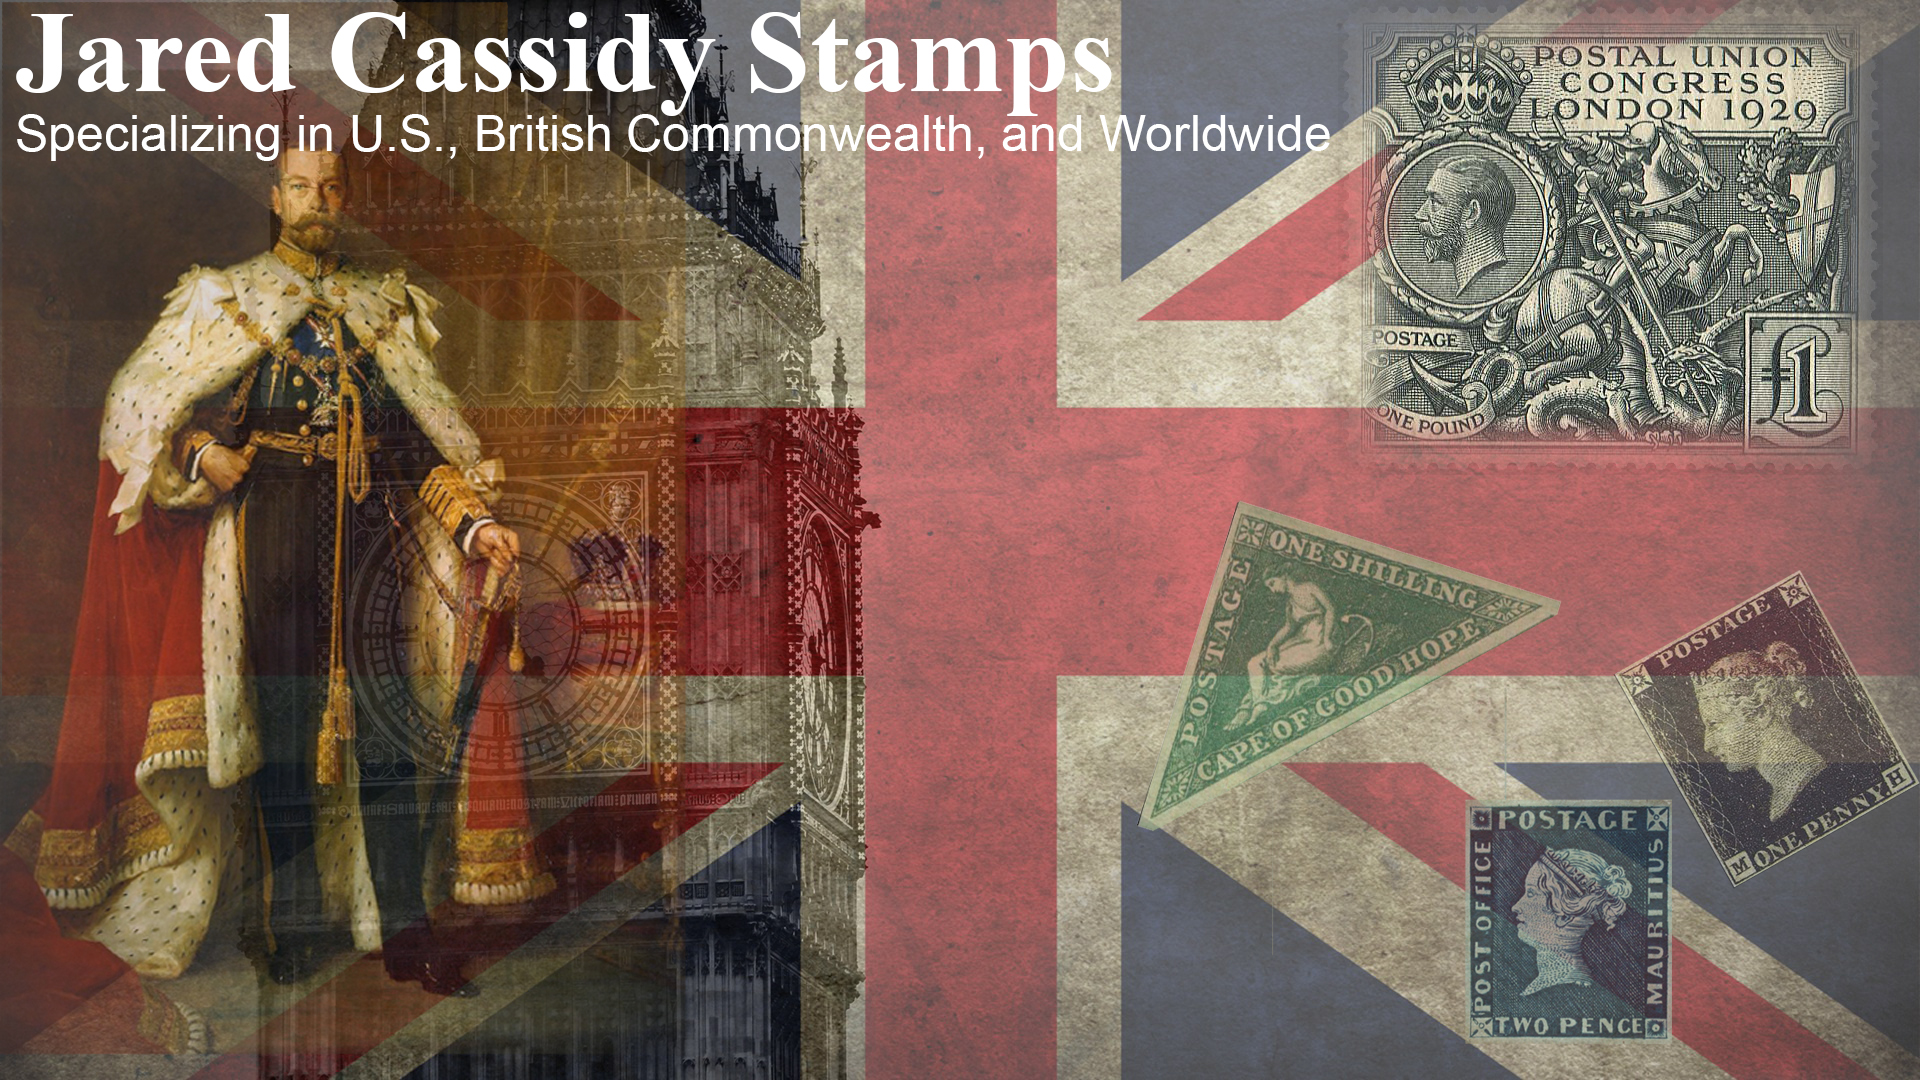 Jared Cassidy Stamps